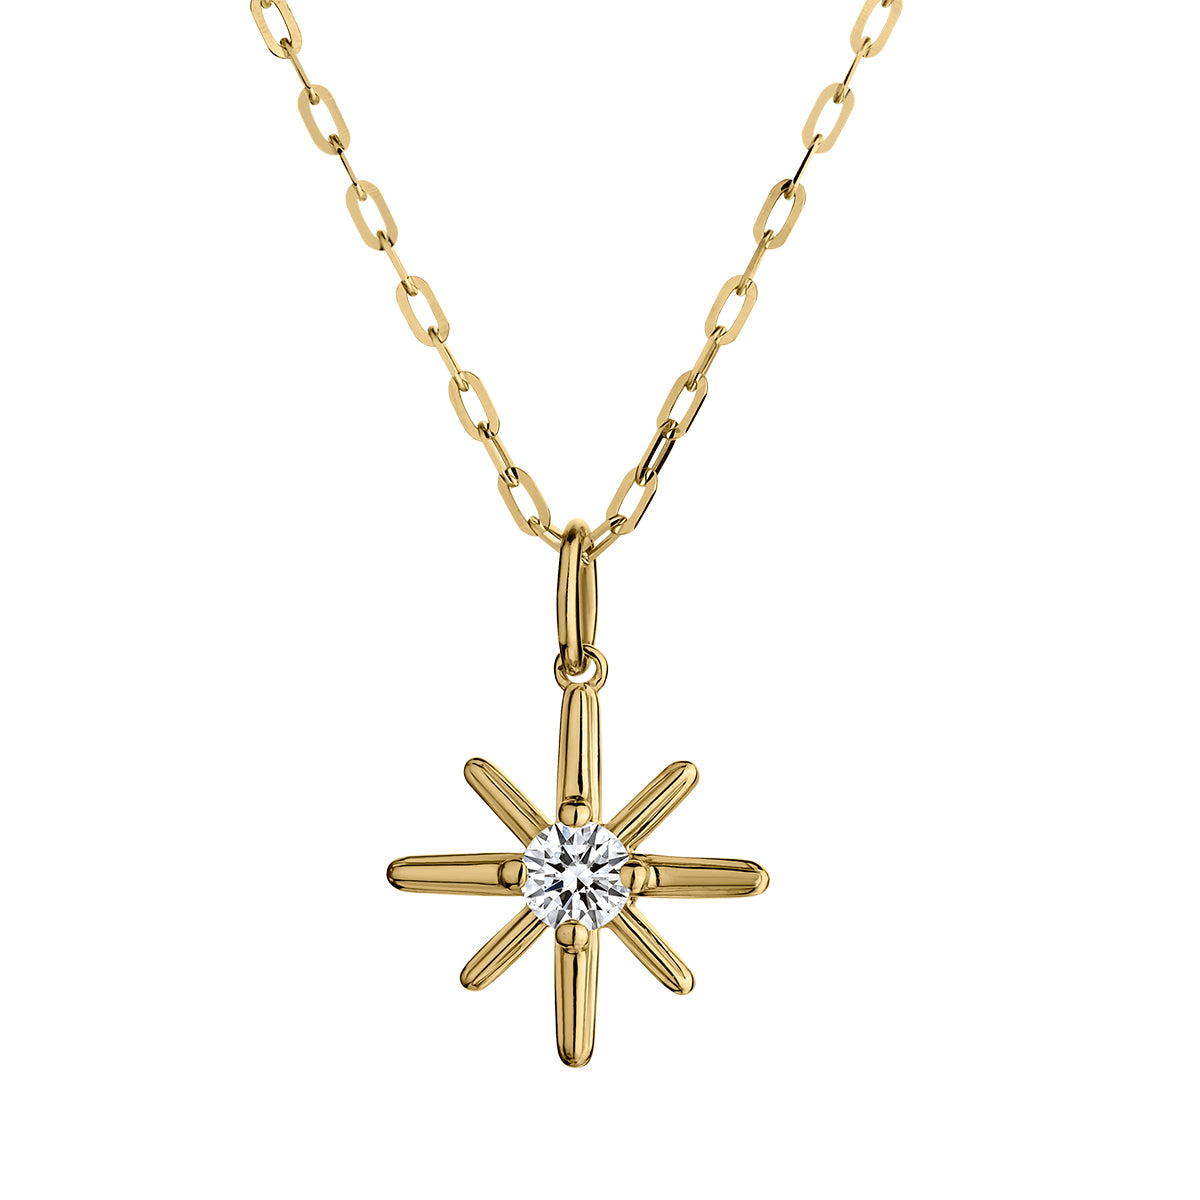 .25 CARAT DIAMOND STAR PENDANT, 10KT YELLOW GOLD, WITH CHAIN…......................NOW